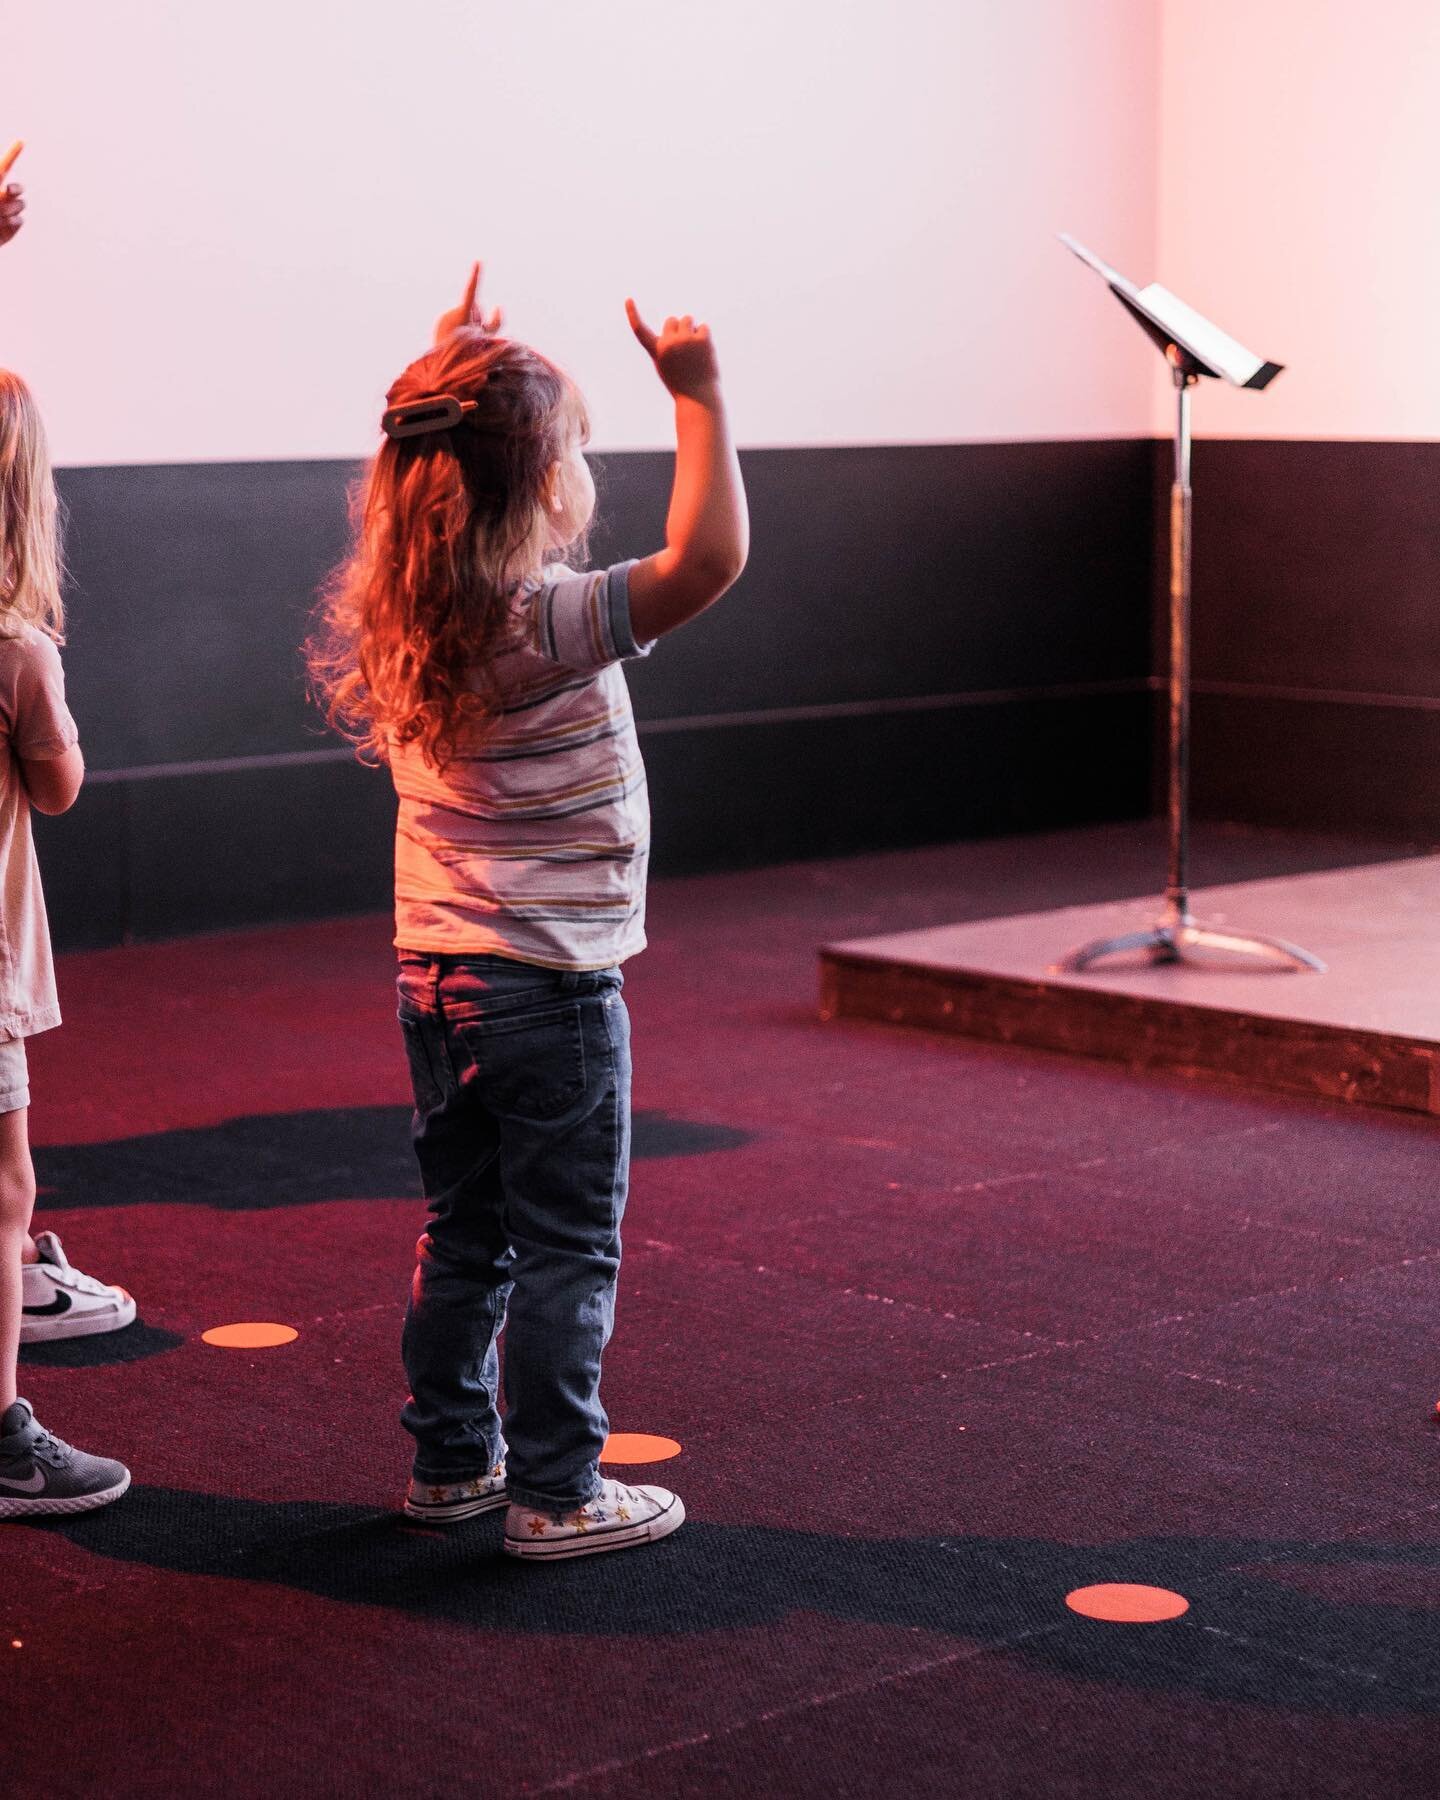 The only thing we love more than a pie to the face, is Jesus!

Sunday was great but this Sunday will be even better. We are closing out our monthly teachings and every child will leave knowing how important they are to God, and his perfect plan to sh